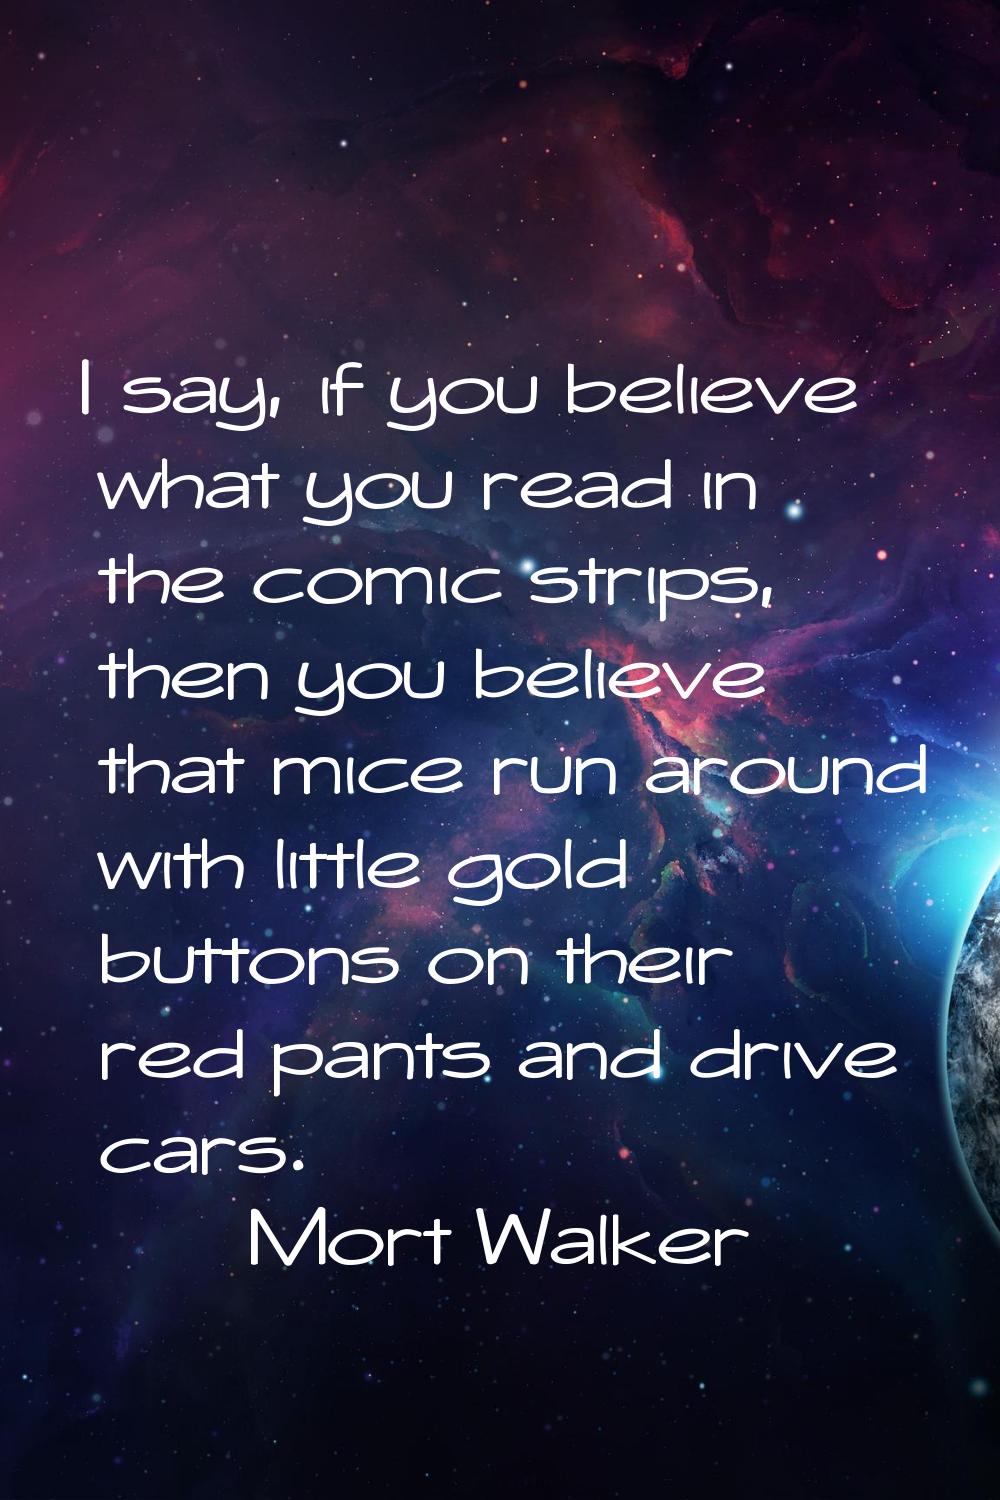 I say, if you believe what you read in the comic strips, then you believe that mice run around with